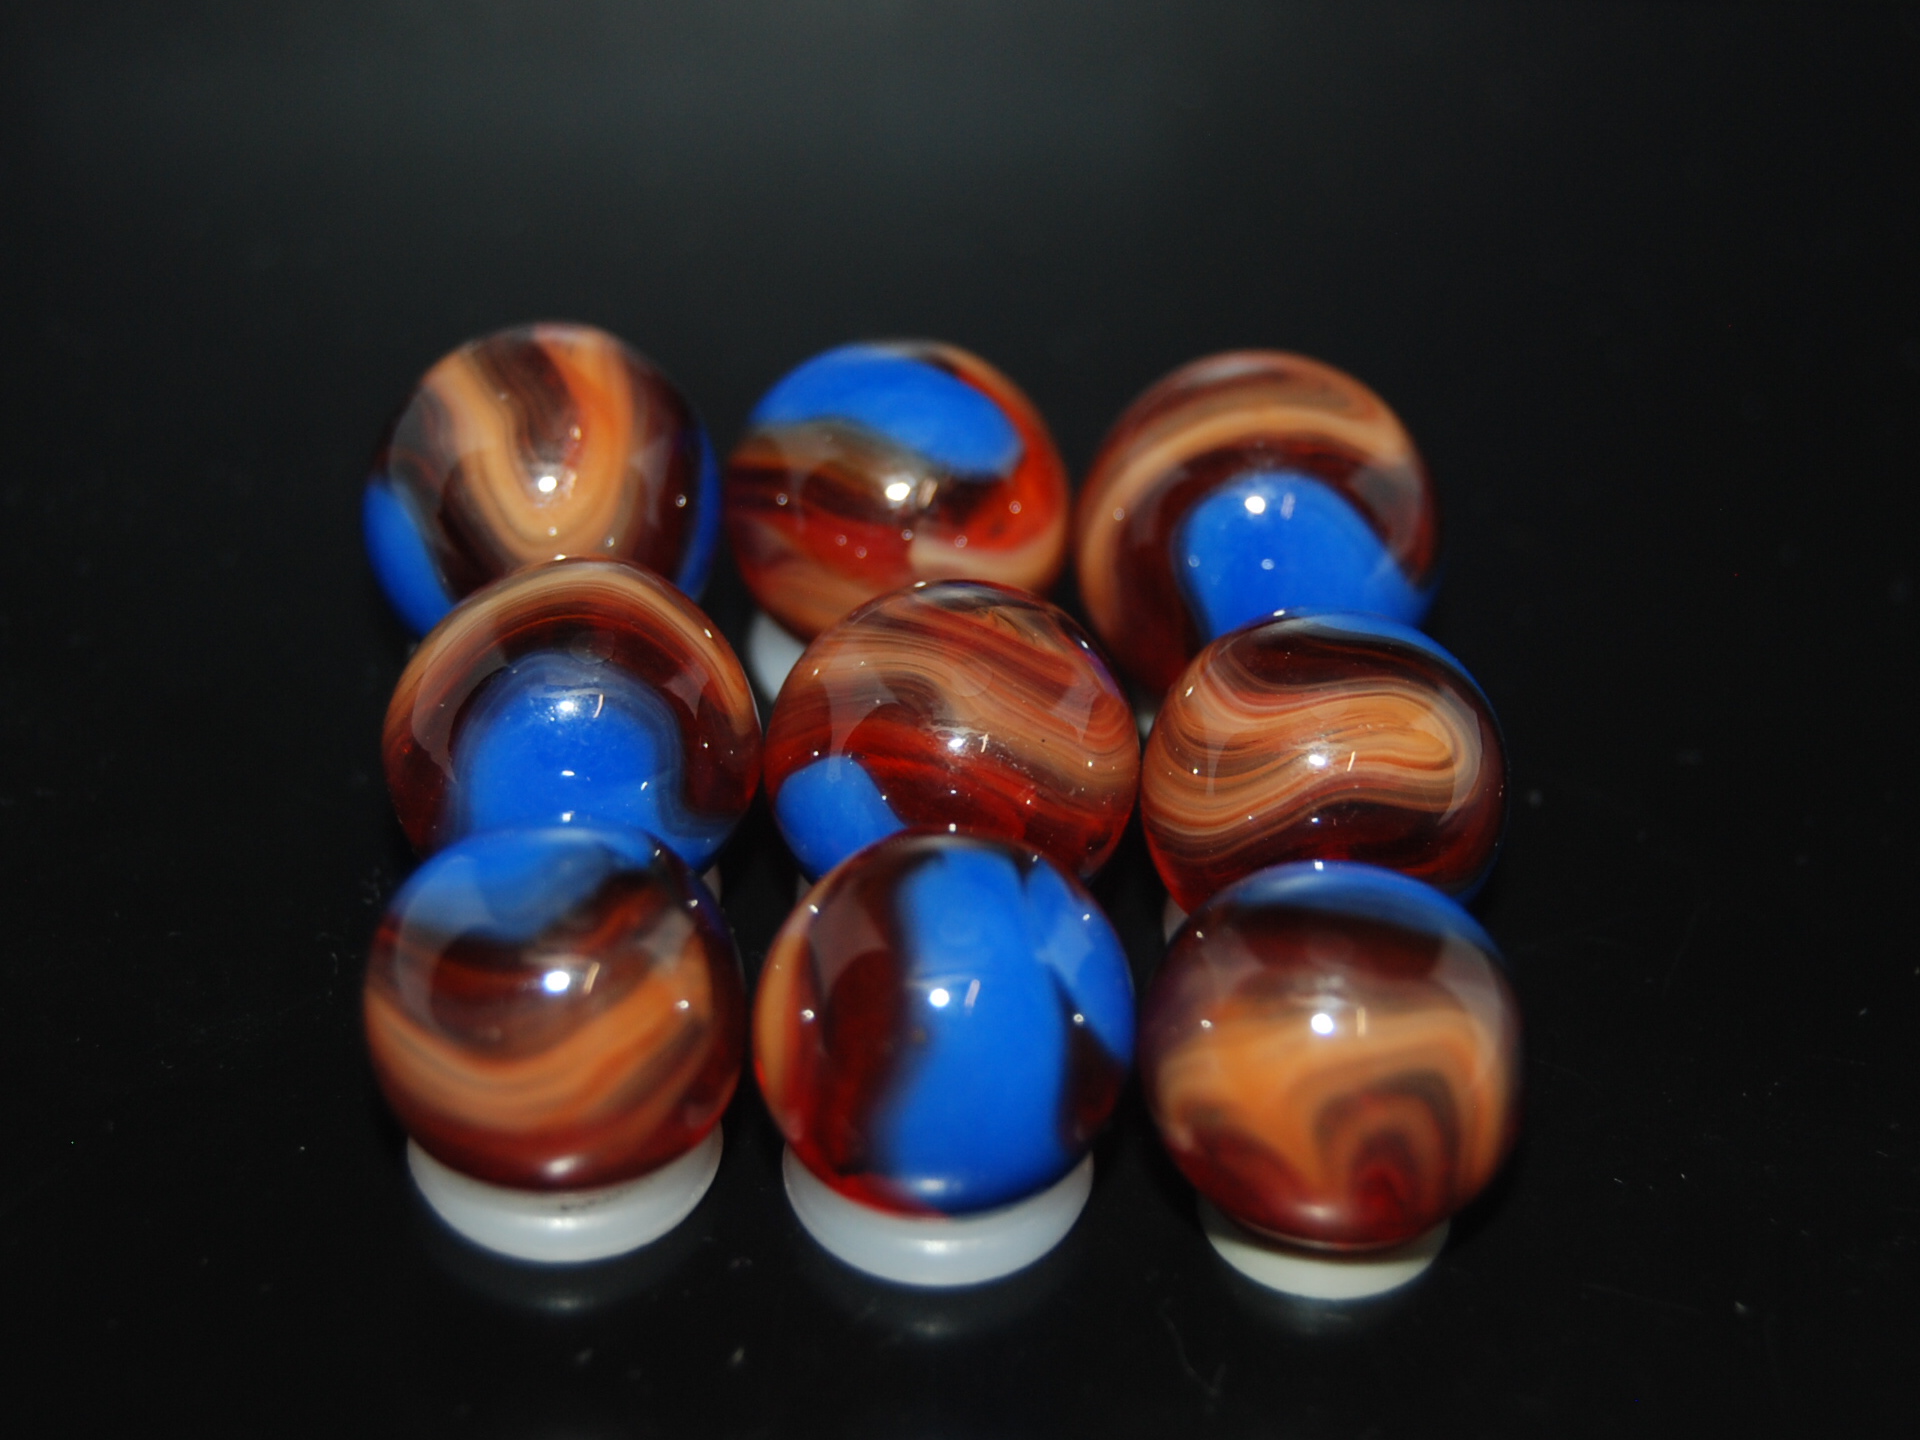 FACTORY BAG OF 45 1 JABO CLASSIC  MARBLES  $11.99 